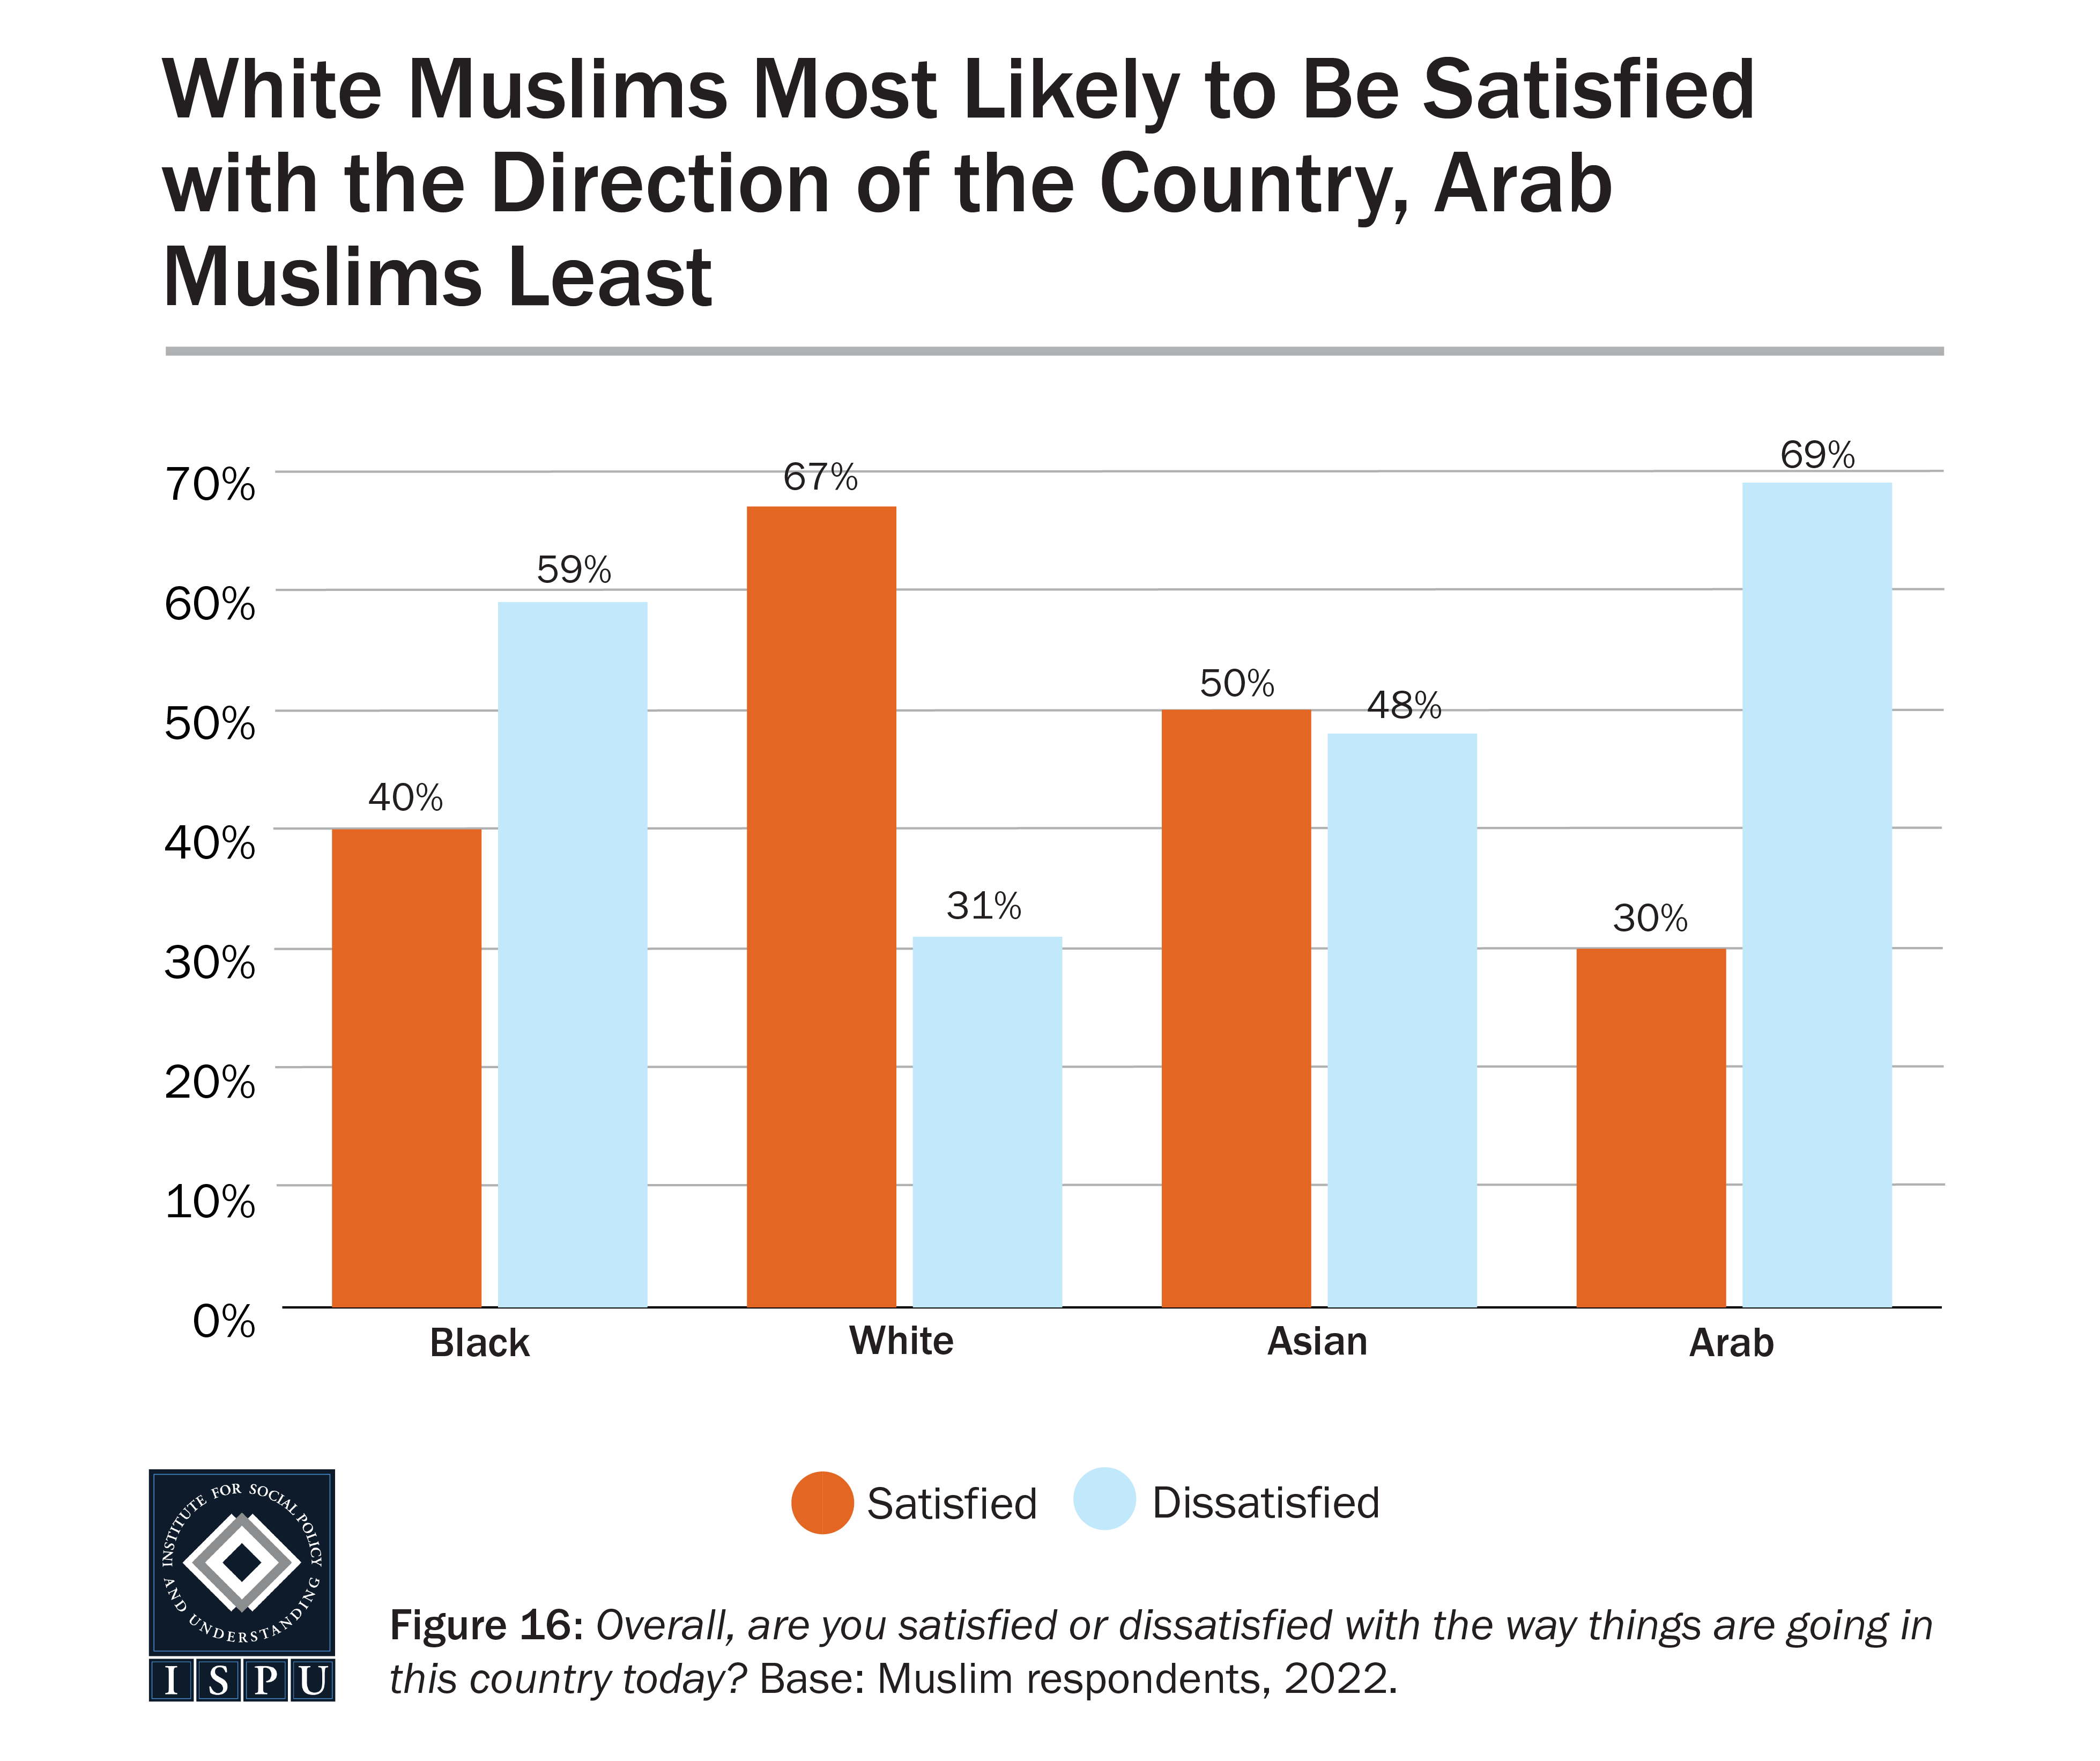 A bar graph showing the proportion of racial/ethnic groups among Muslims who are satisfied and dissatisfied with the direction of the country.